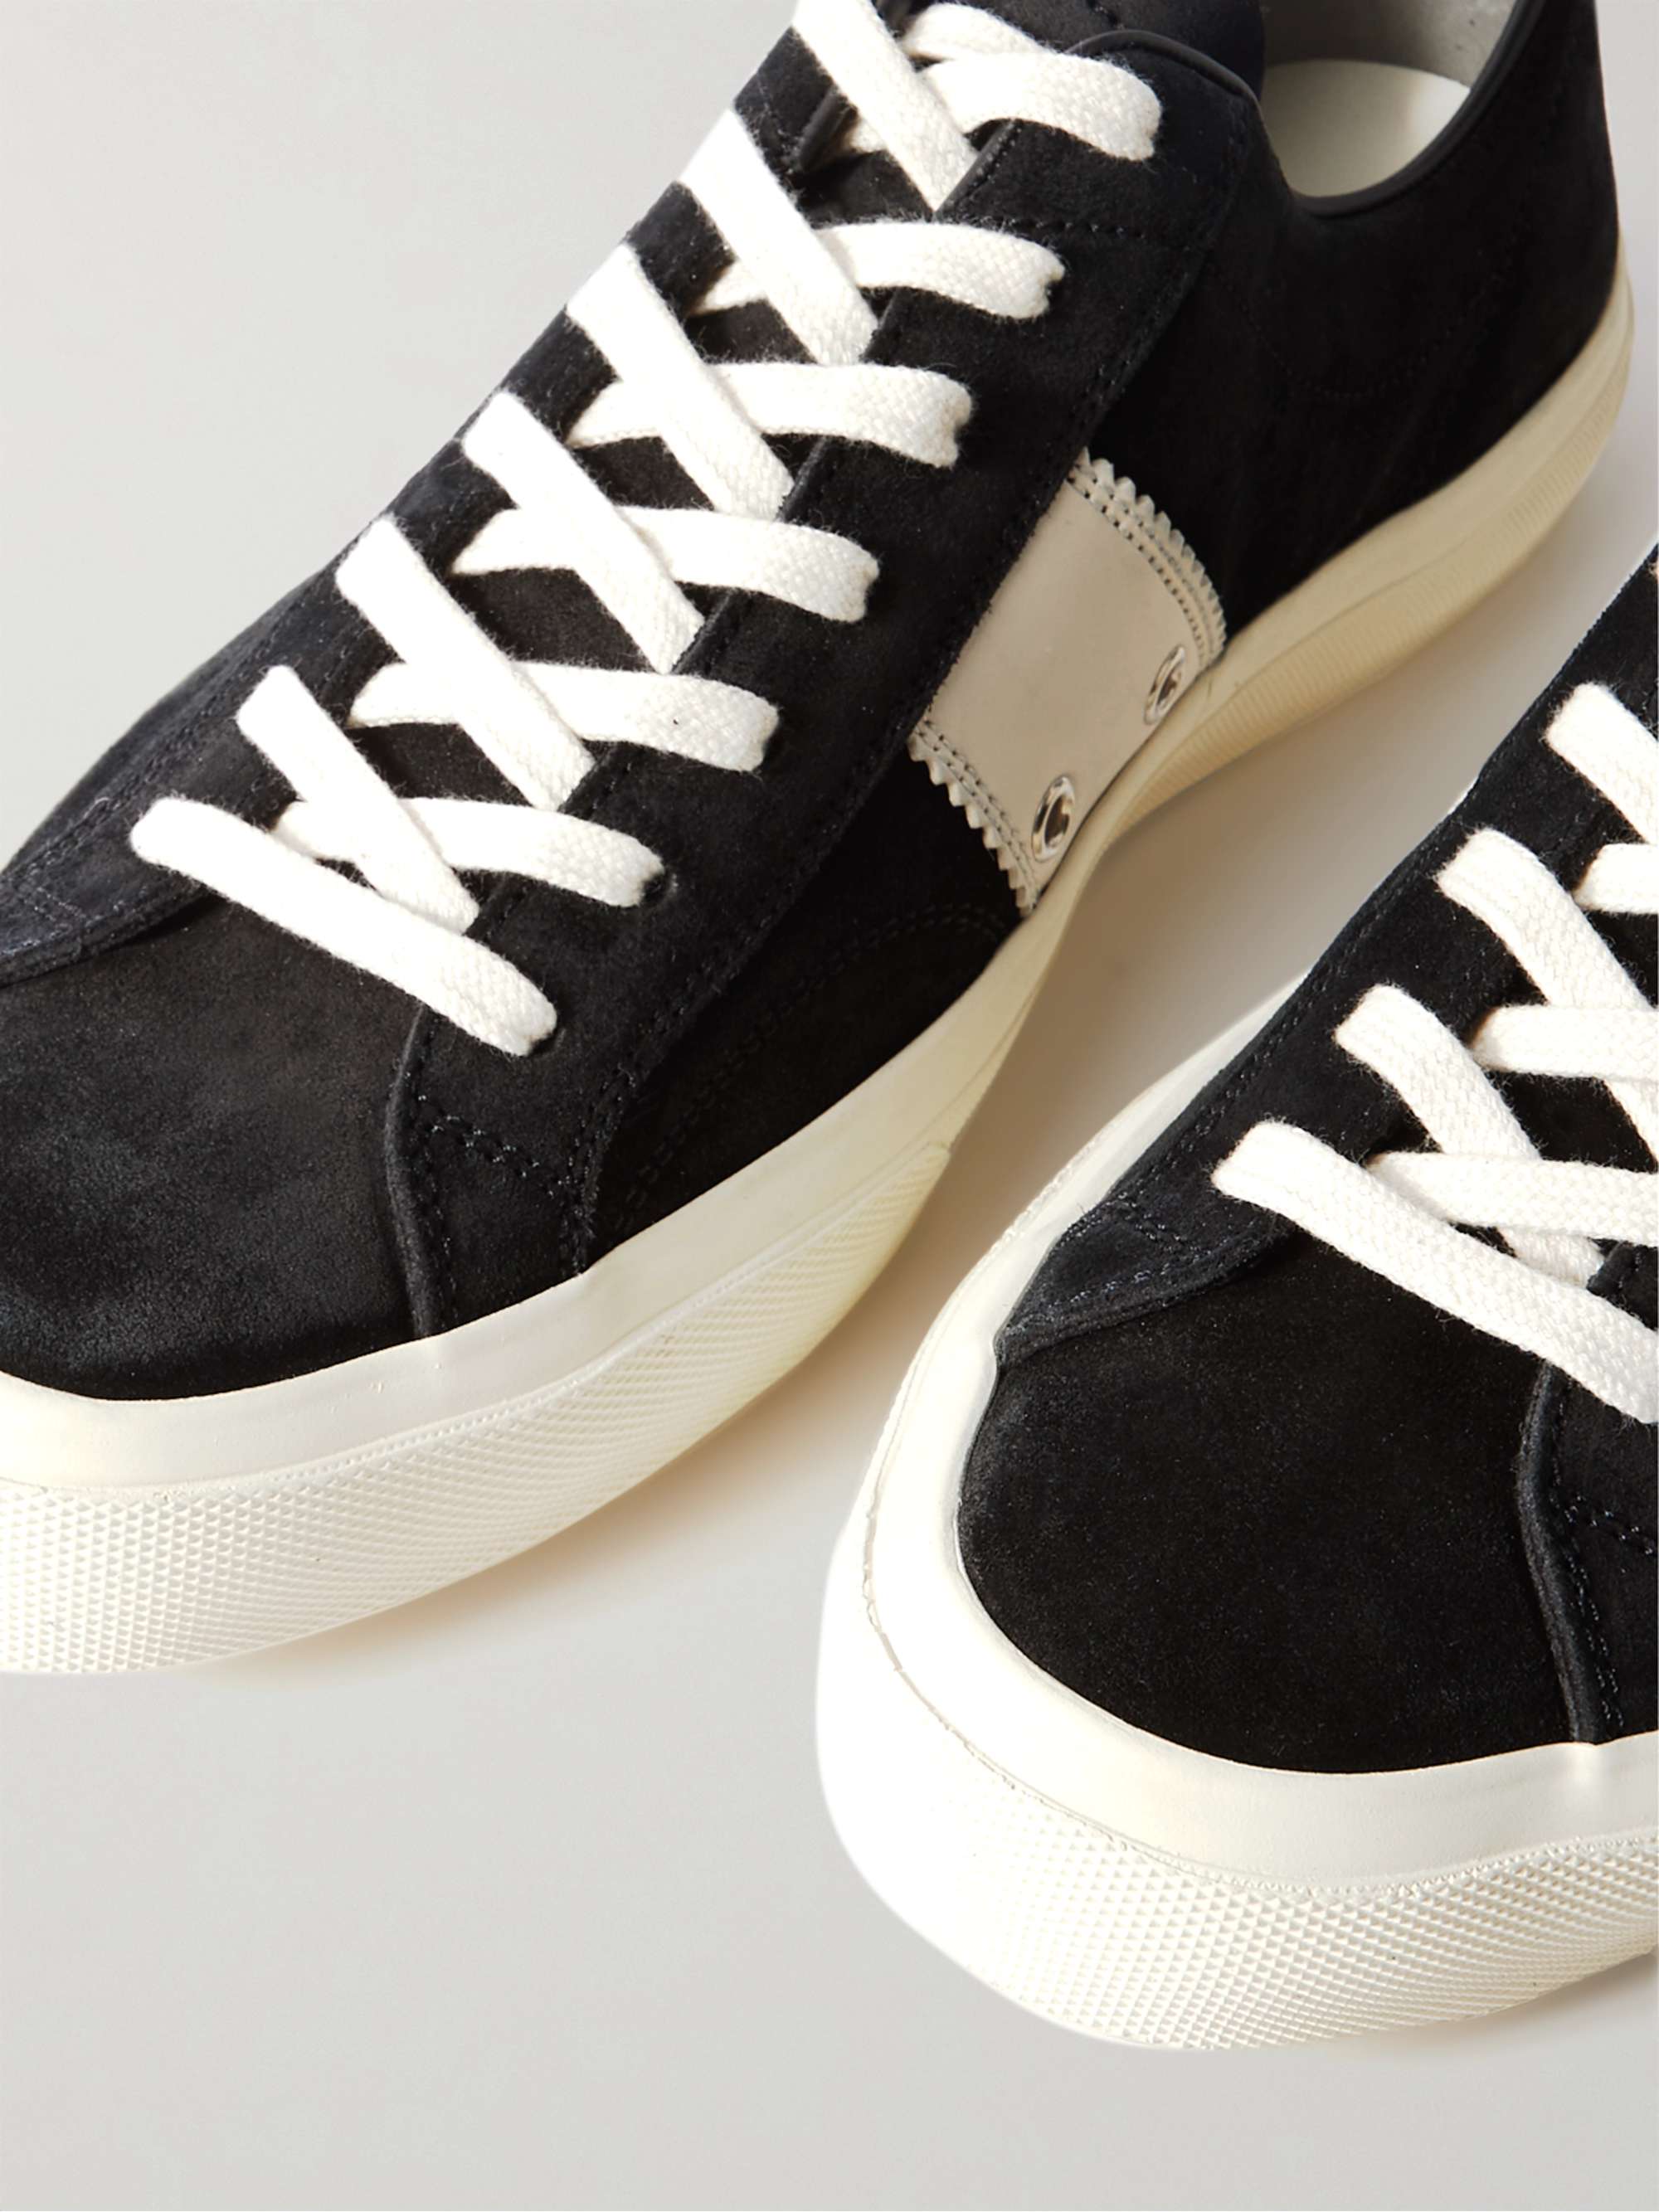 TOM FORD Cambridge Leather-Trimmed Suede Sneakers